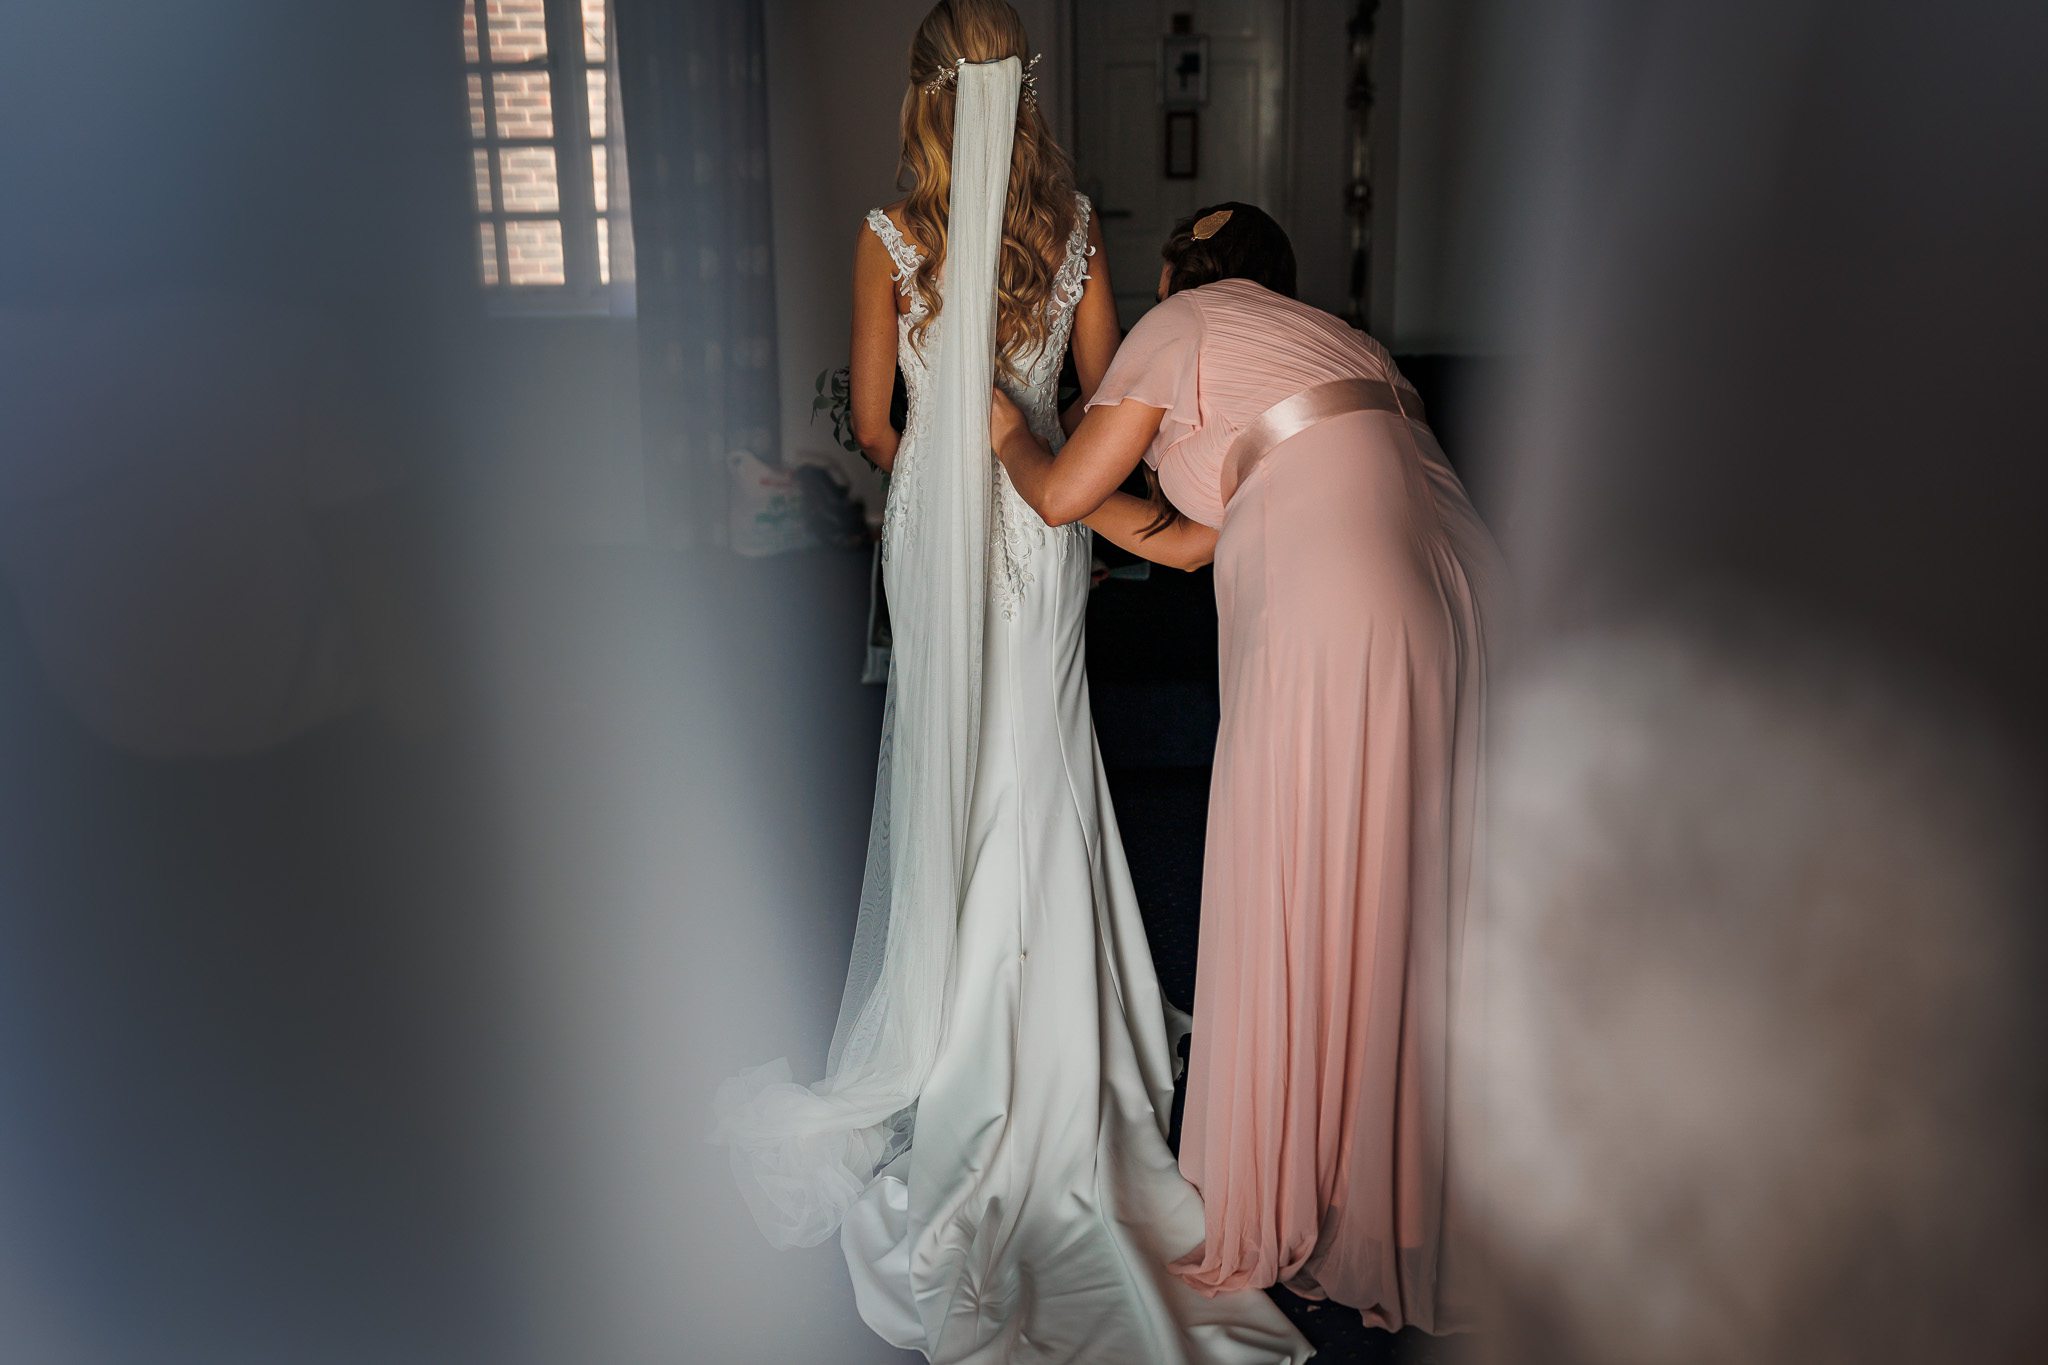 dress being tied